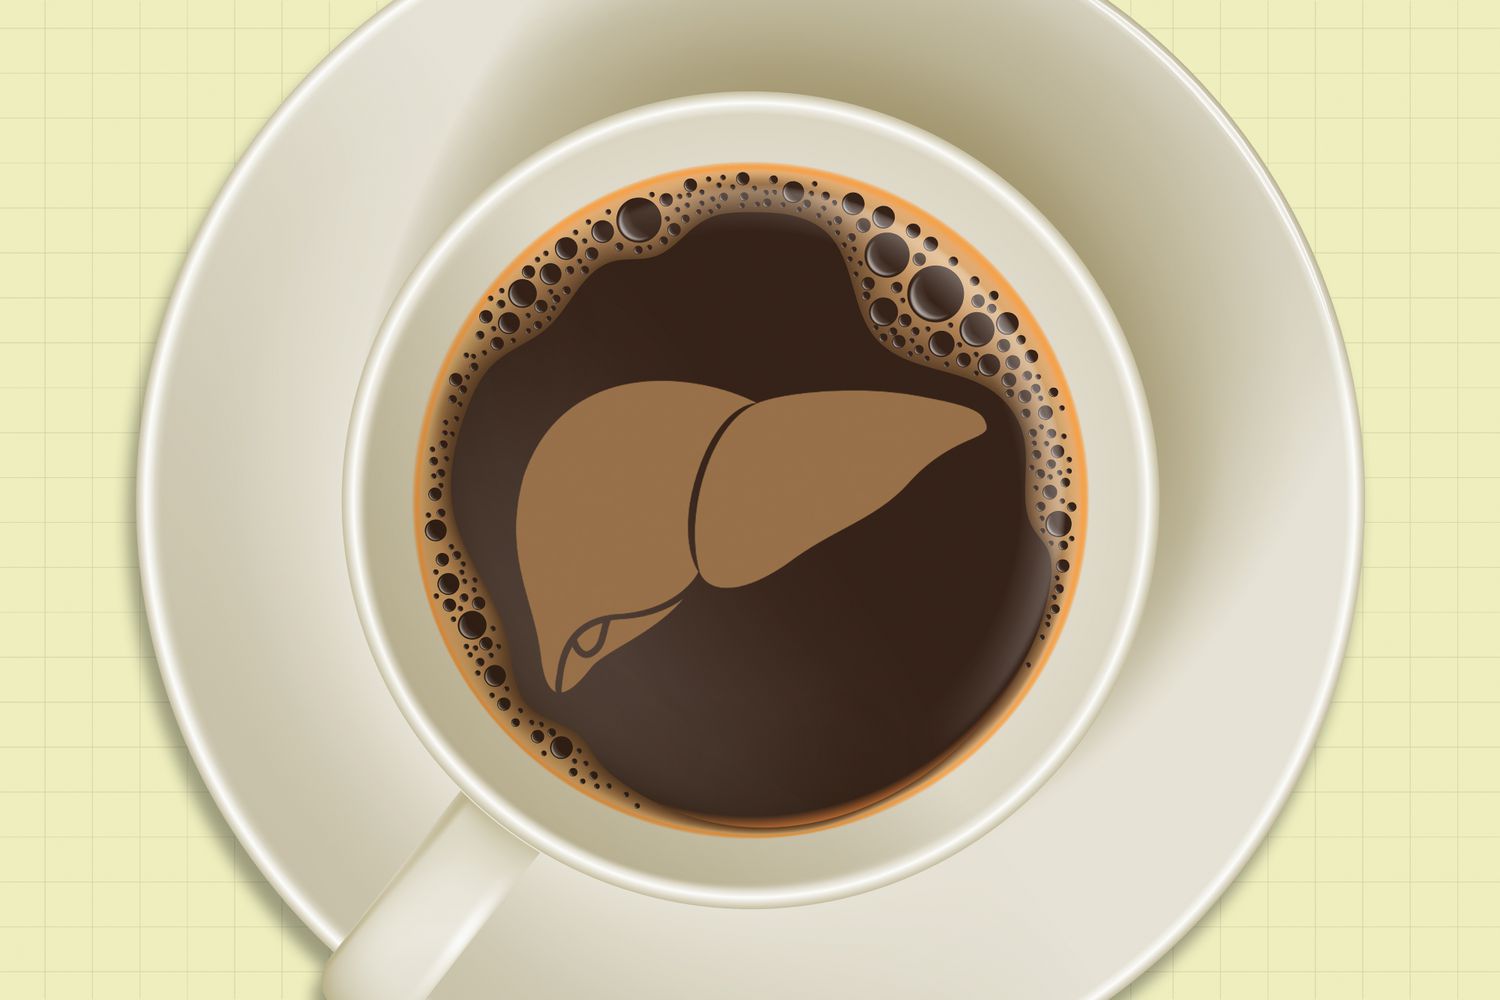 A coffee cup full of coffee with the shape of a liver in it